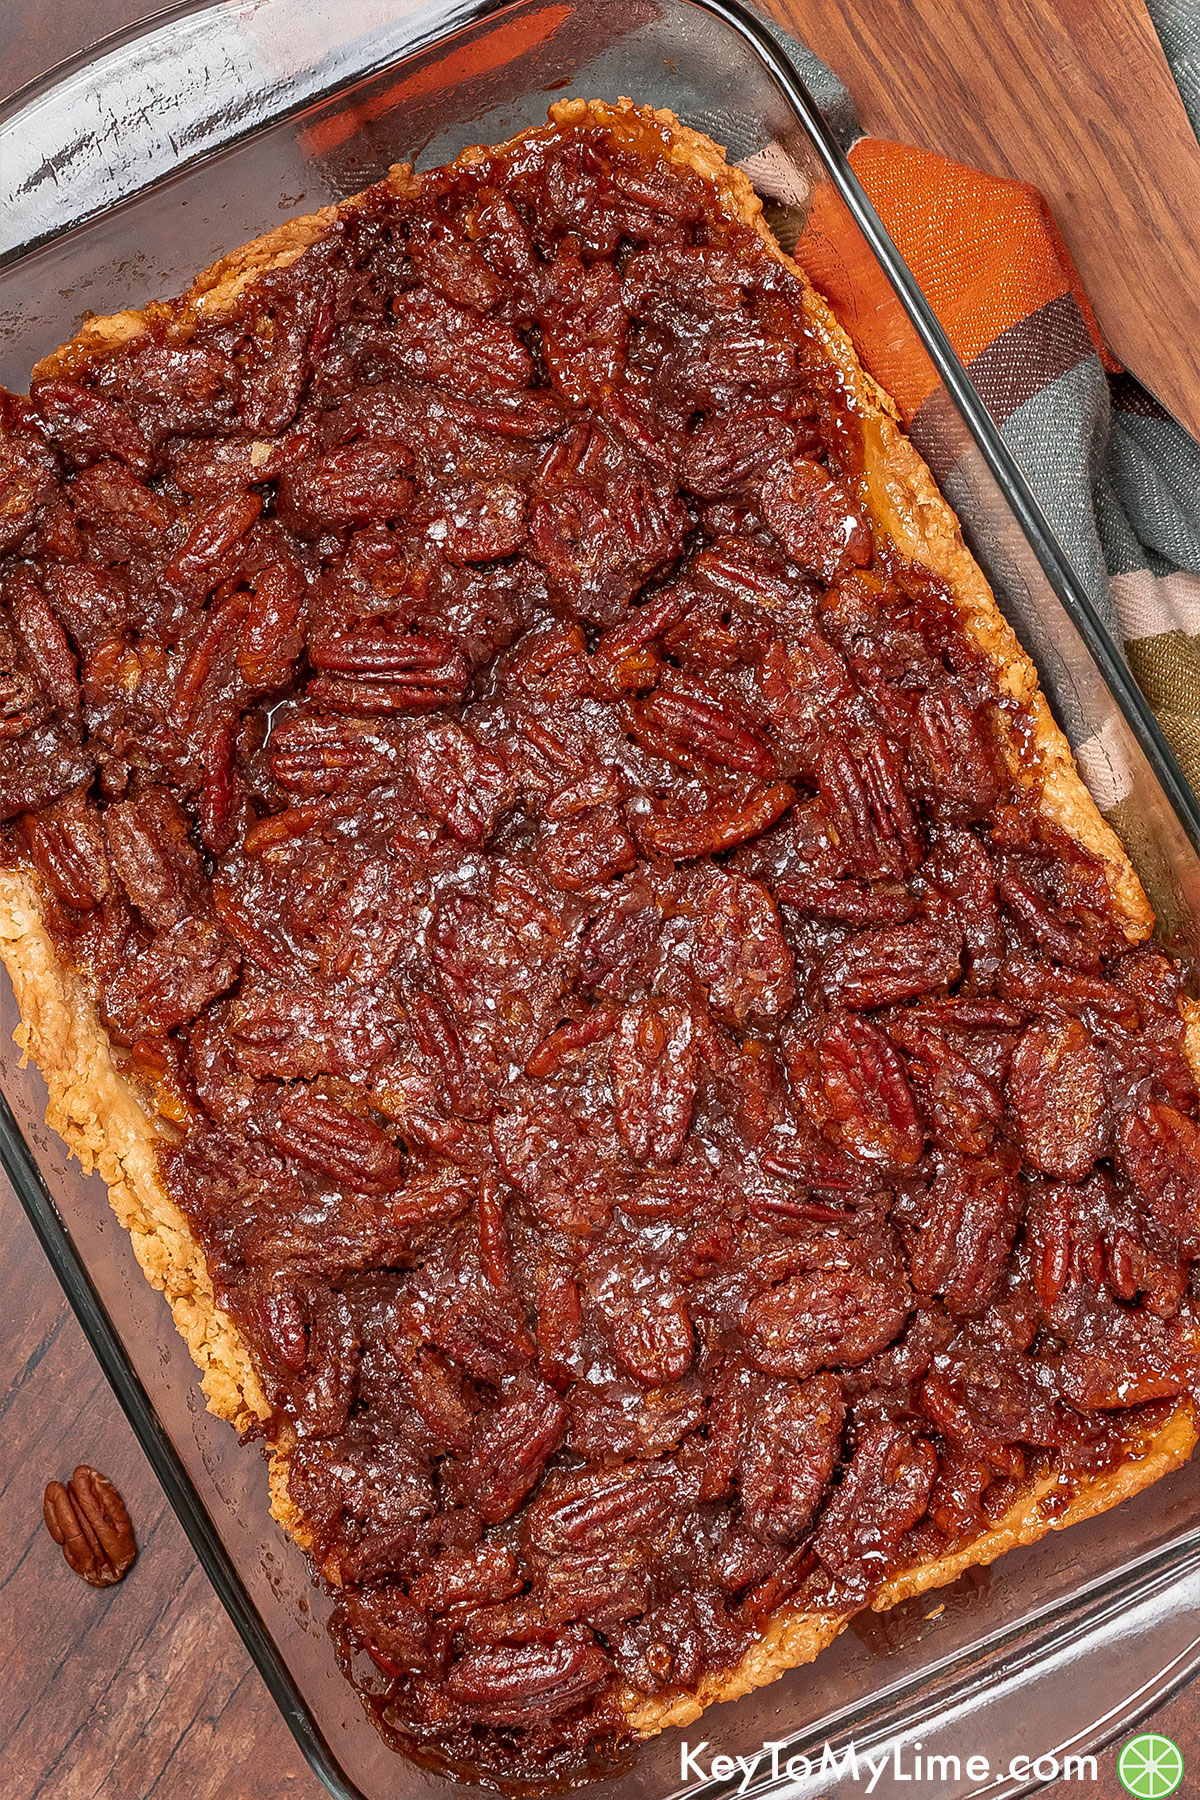 An angled image of a finished pecan cobbler with a layer of caramelized pecans.